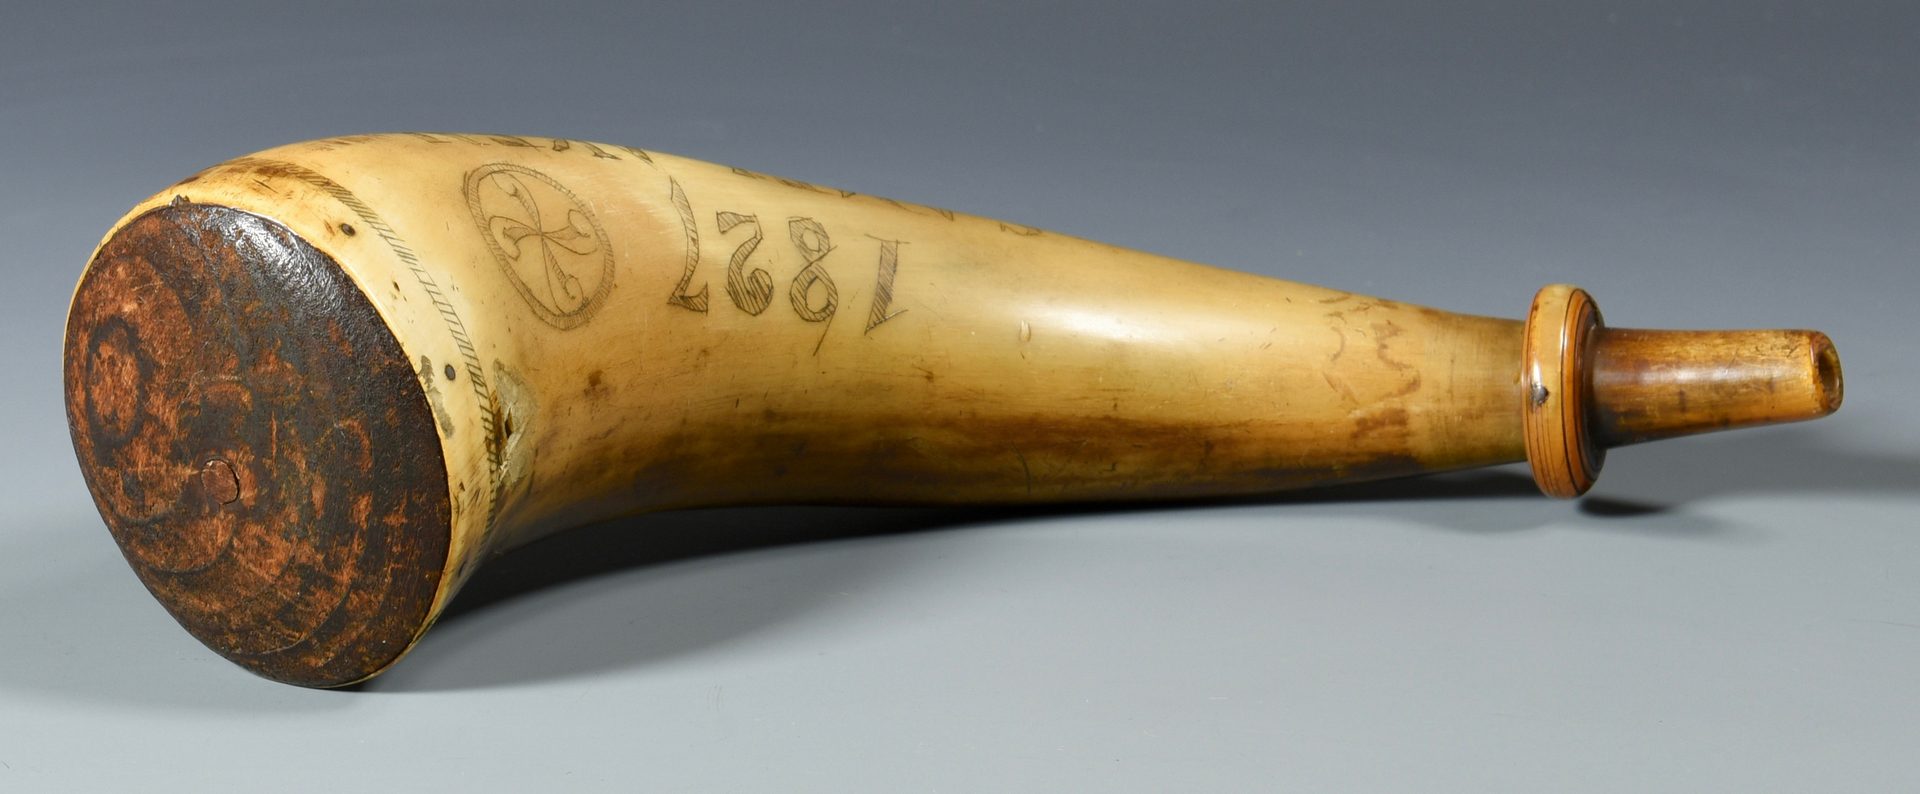 Lot 302: Signed & Dated TN Powder Horn